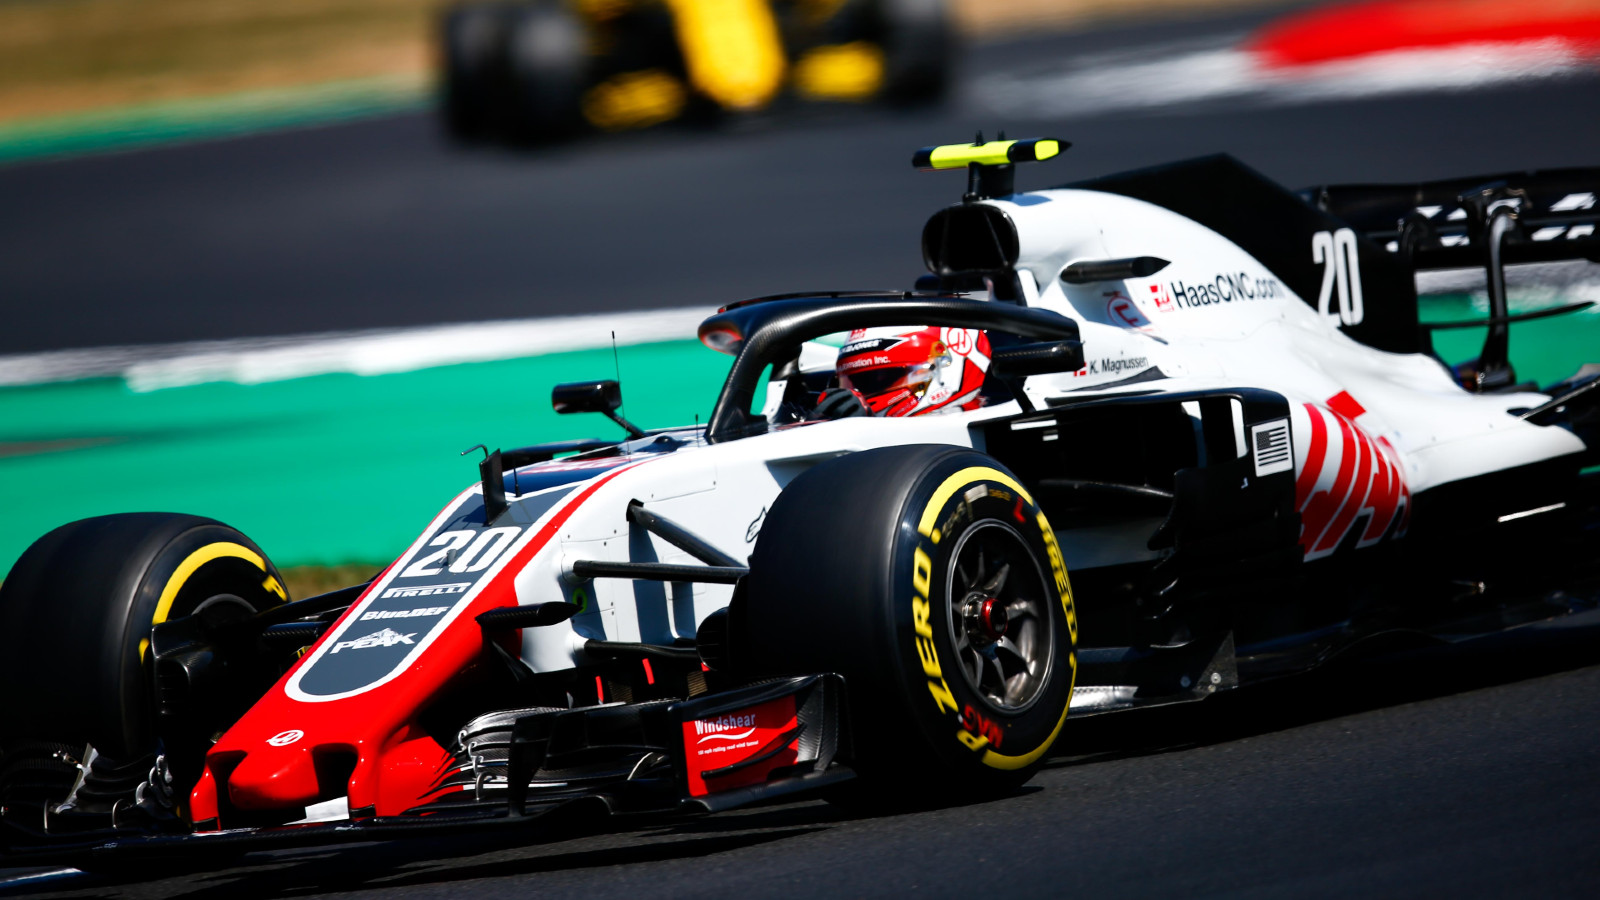 Kevin Magnussen driving his 2018 Haas VF-18 at the British Grand Prix.